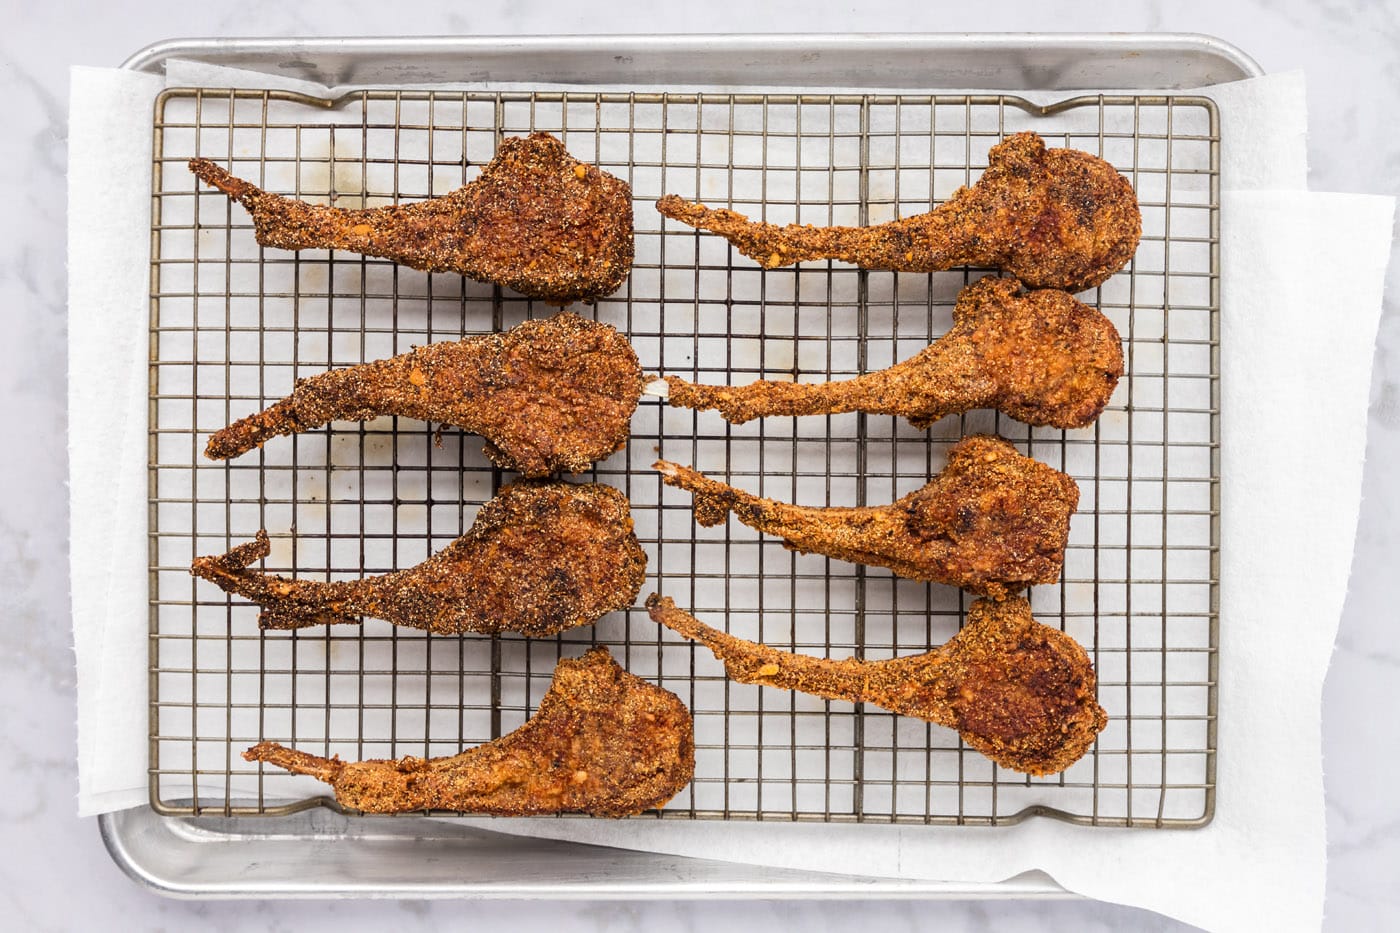 golden crusted fried lamb chops on a wire rack